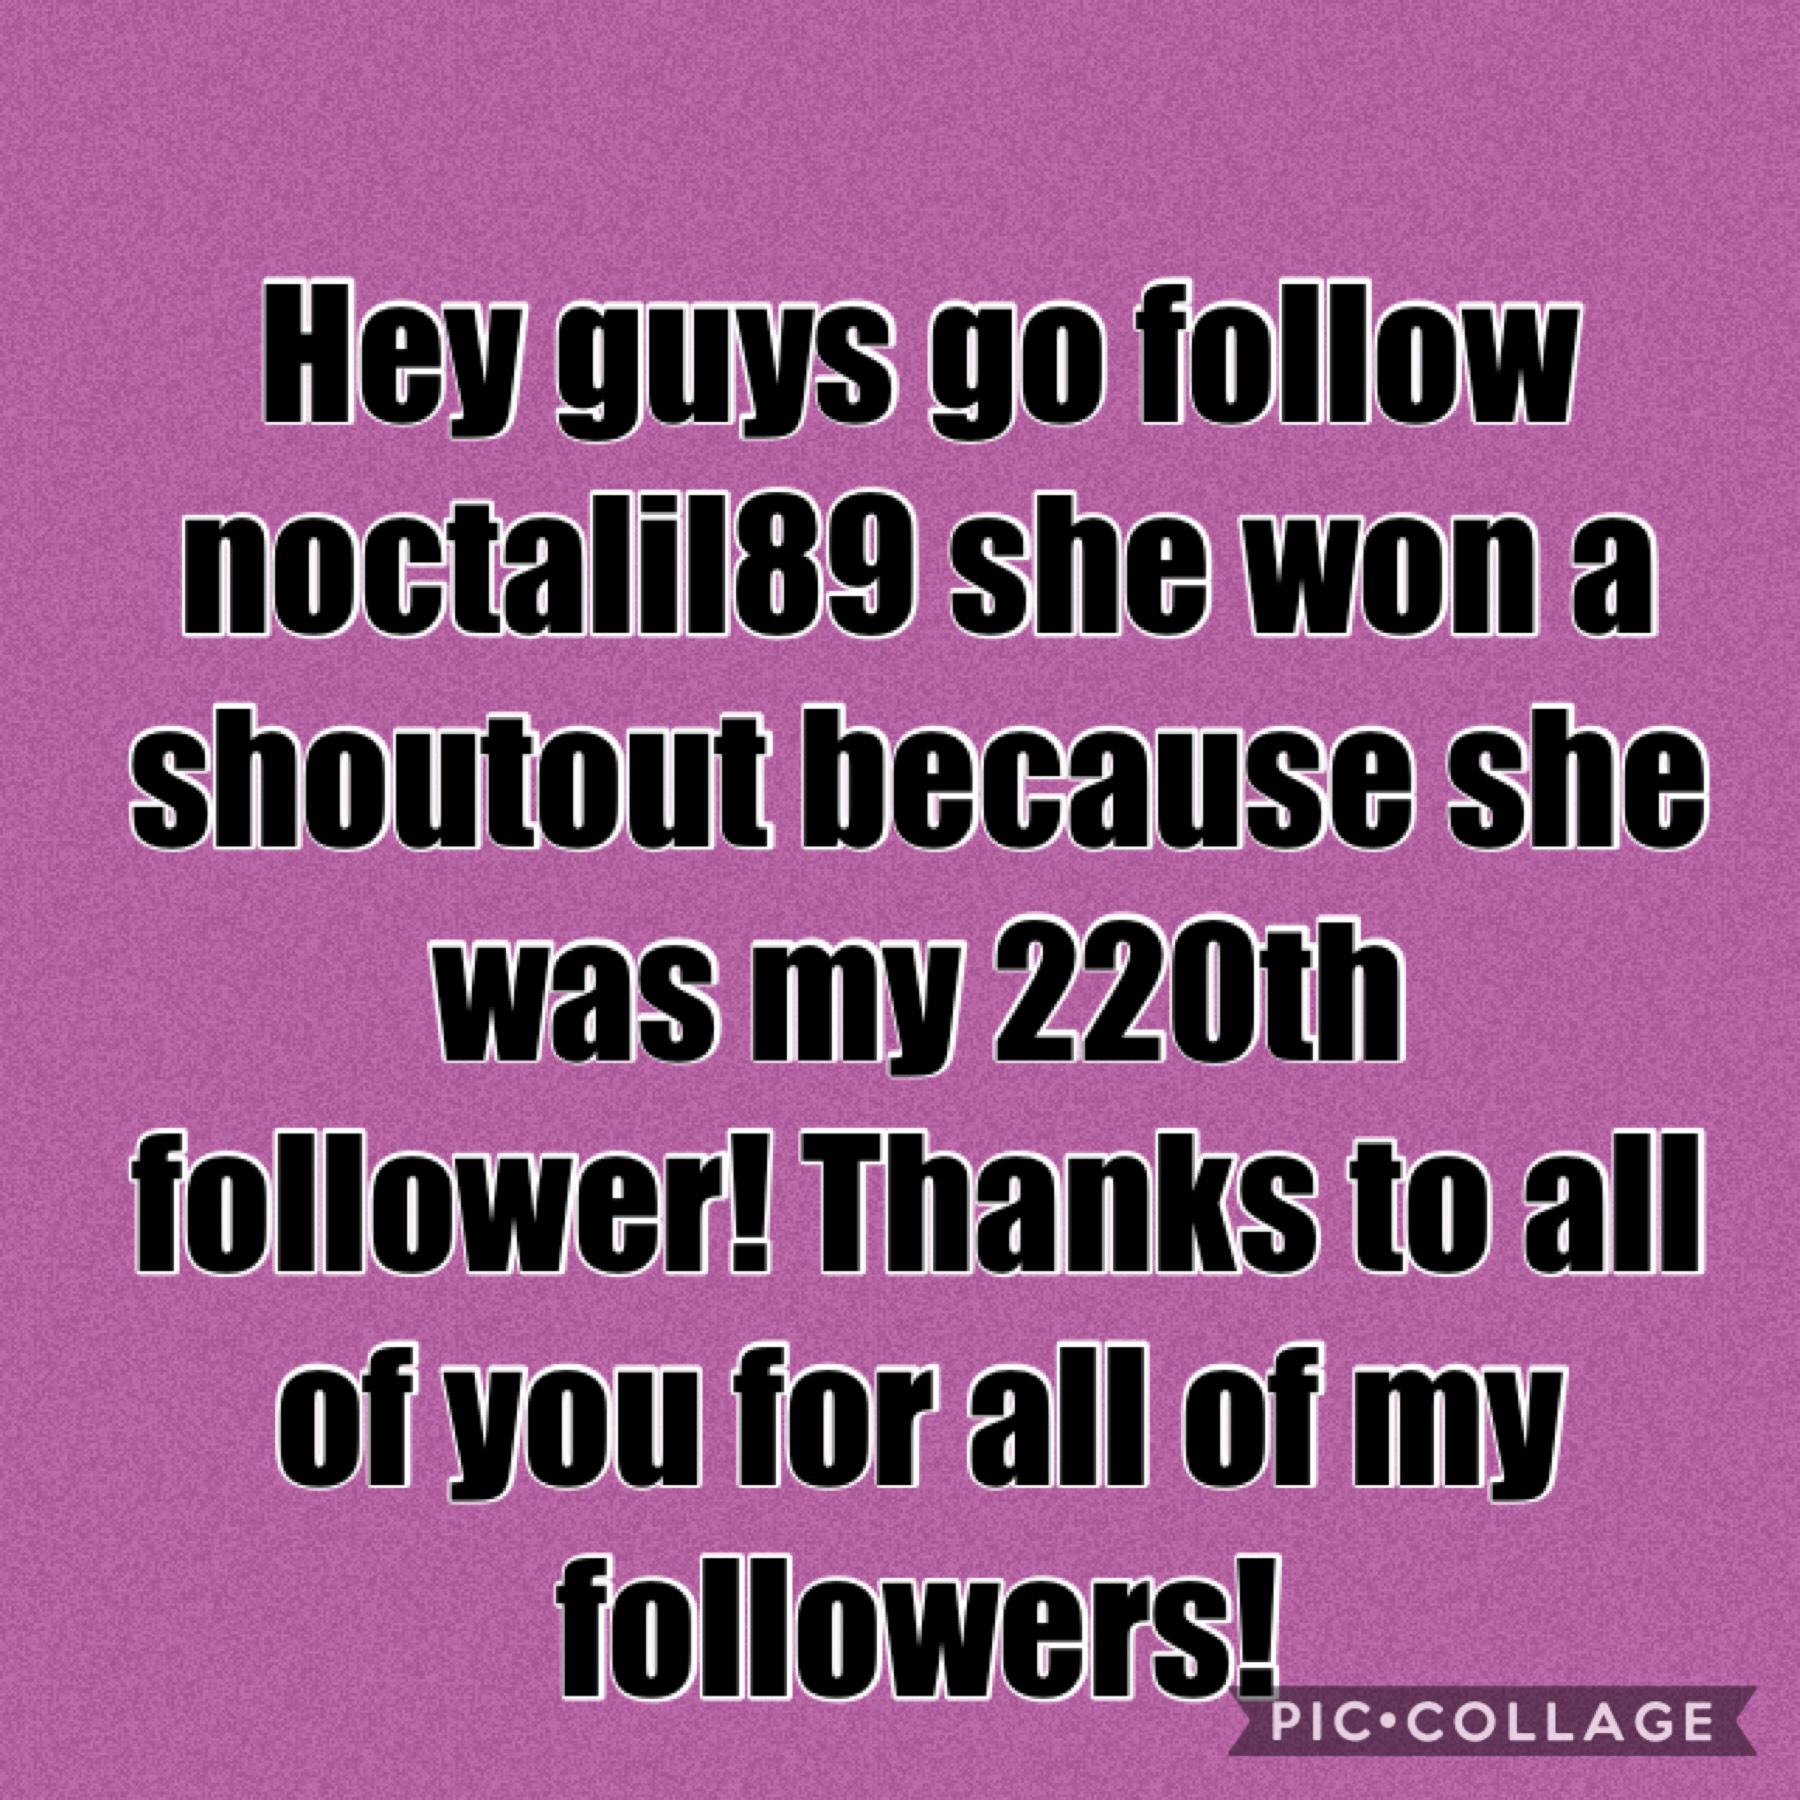 Thanks to all of my follower be my 230th follower and get a shoutout and more!